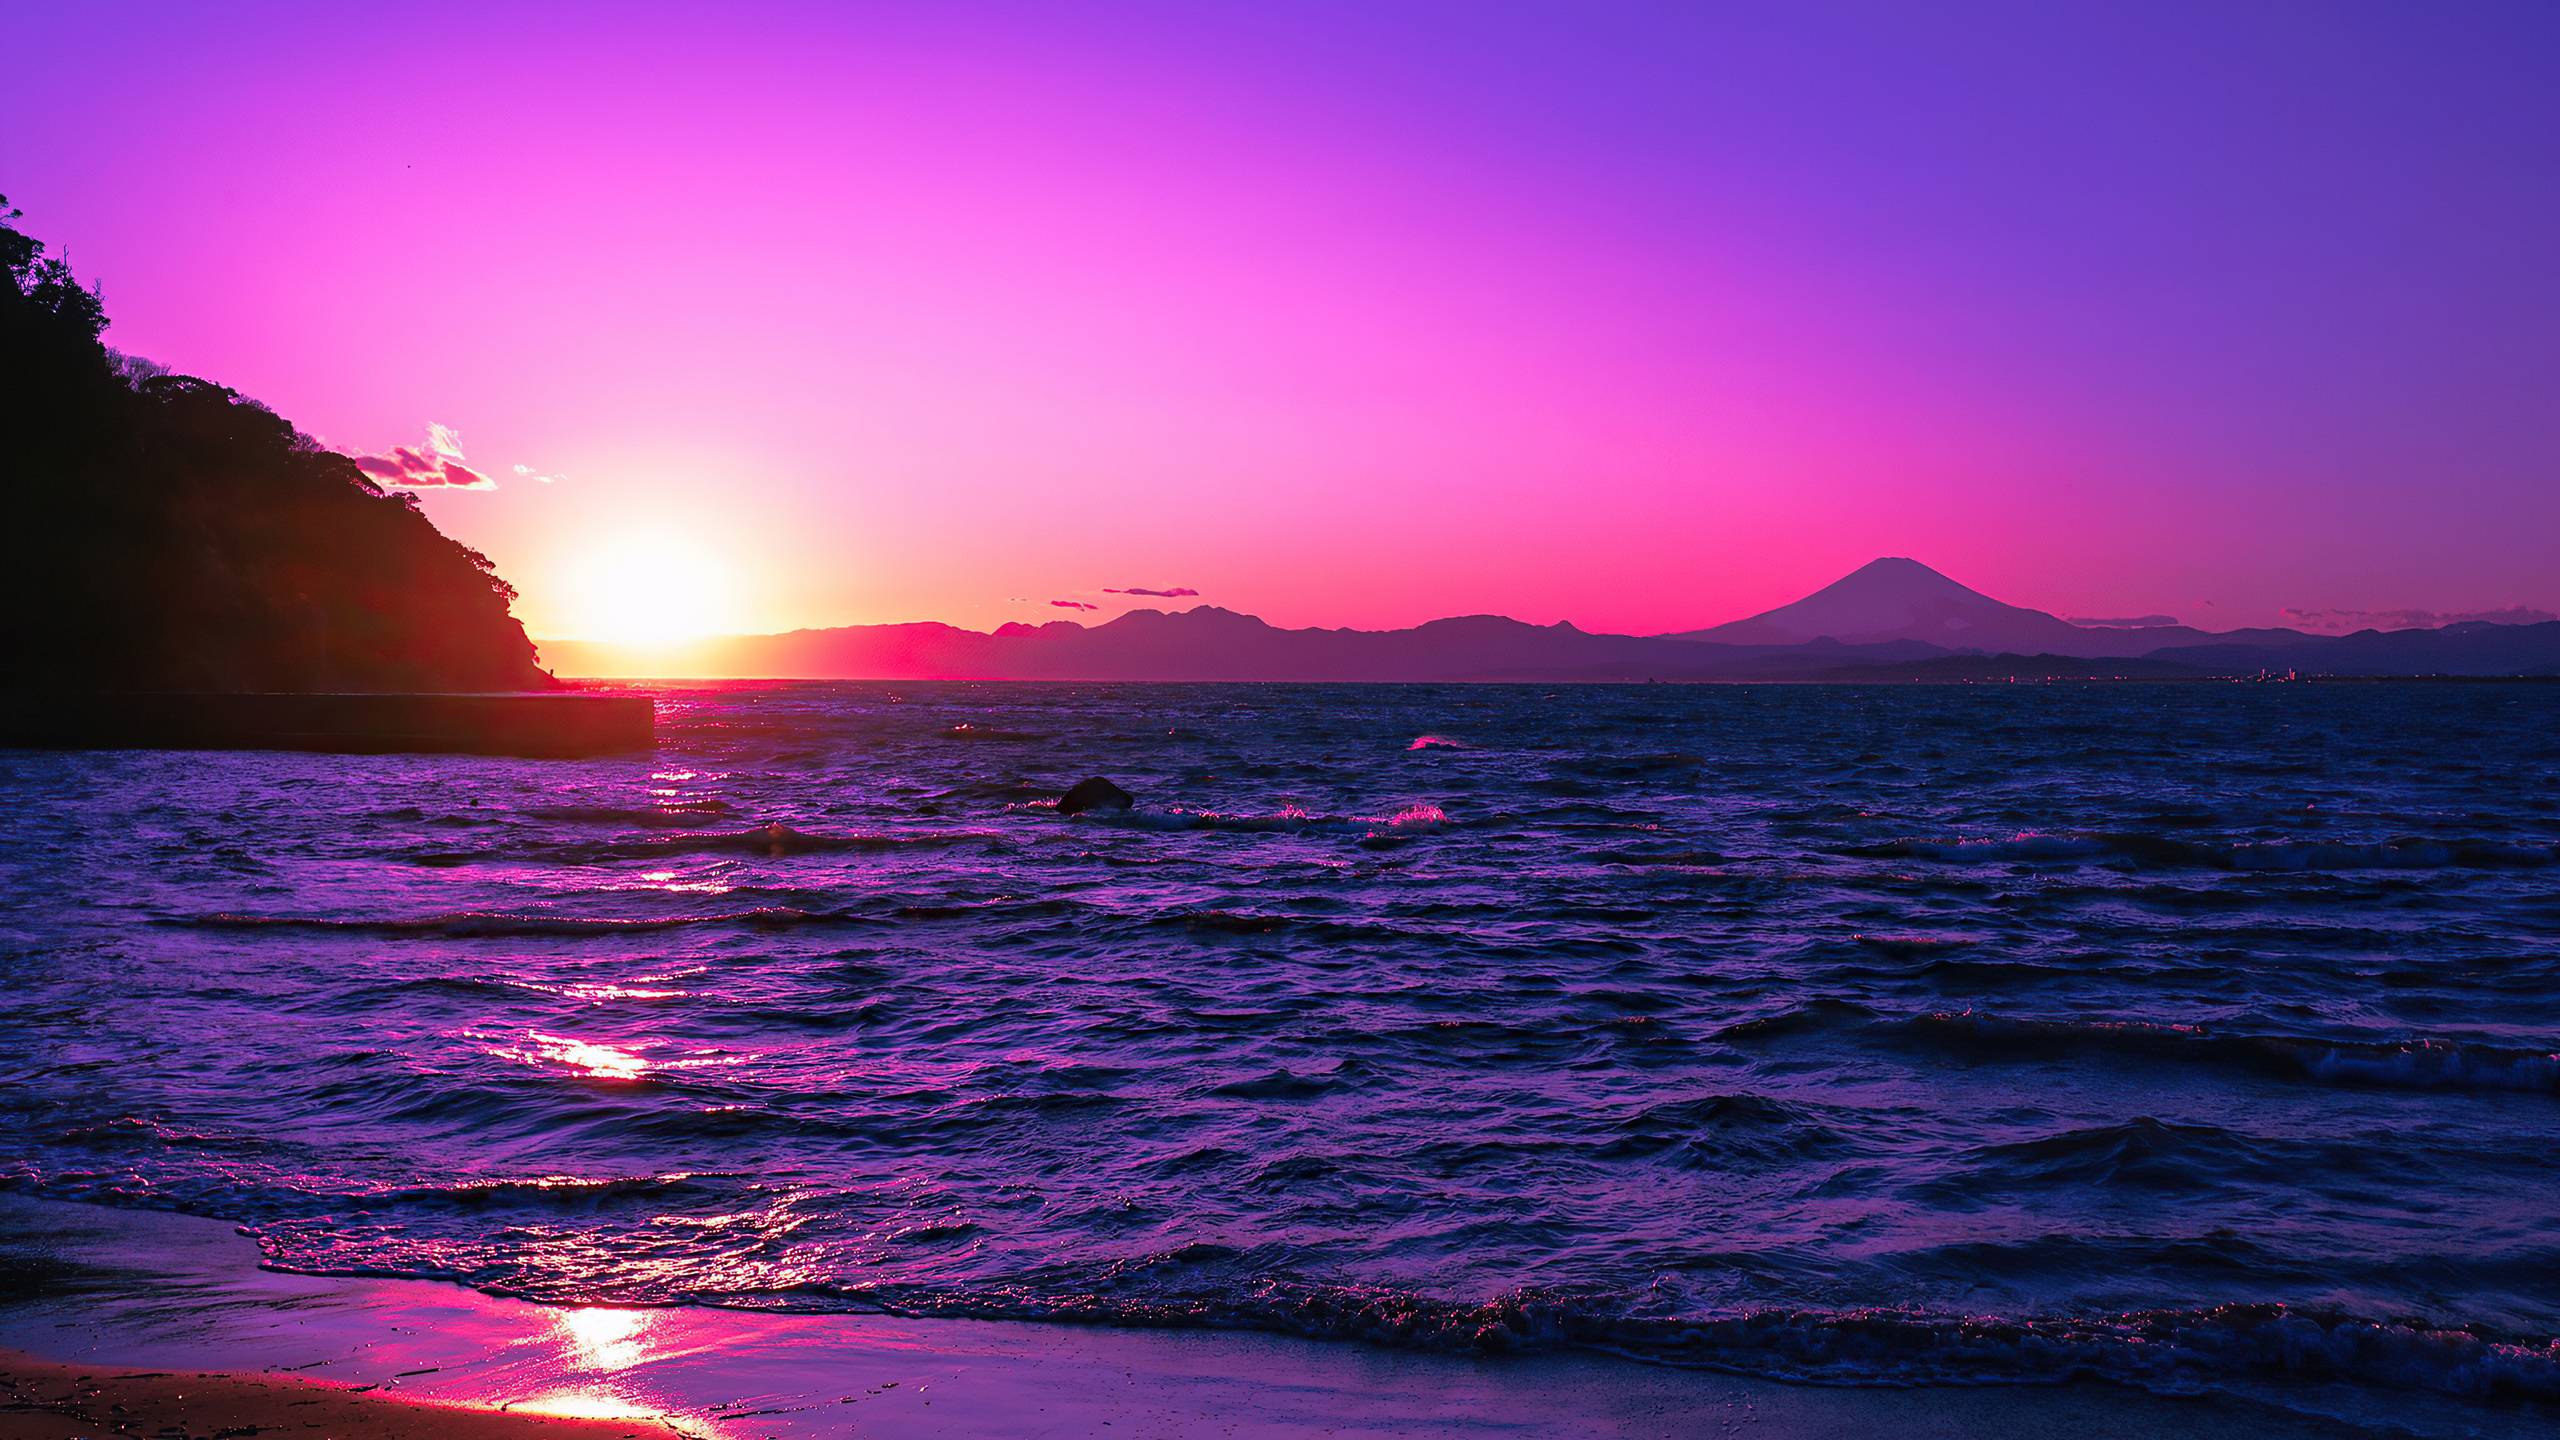 A sunset over the ocean with mountains in background - Sunset